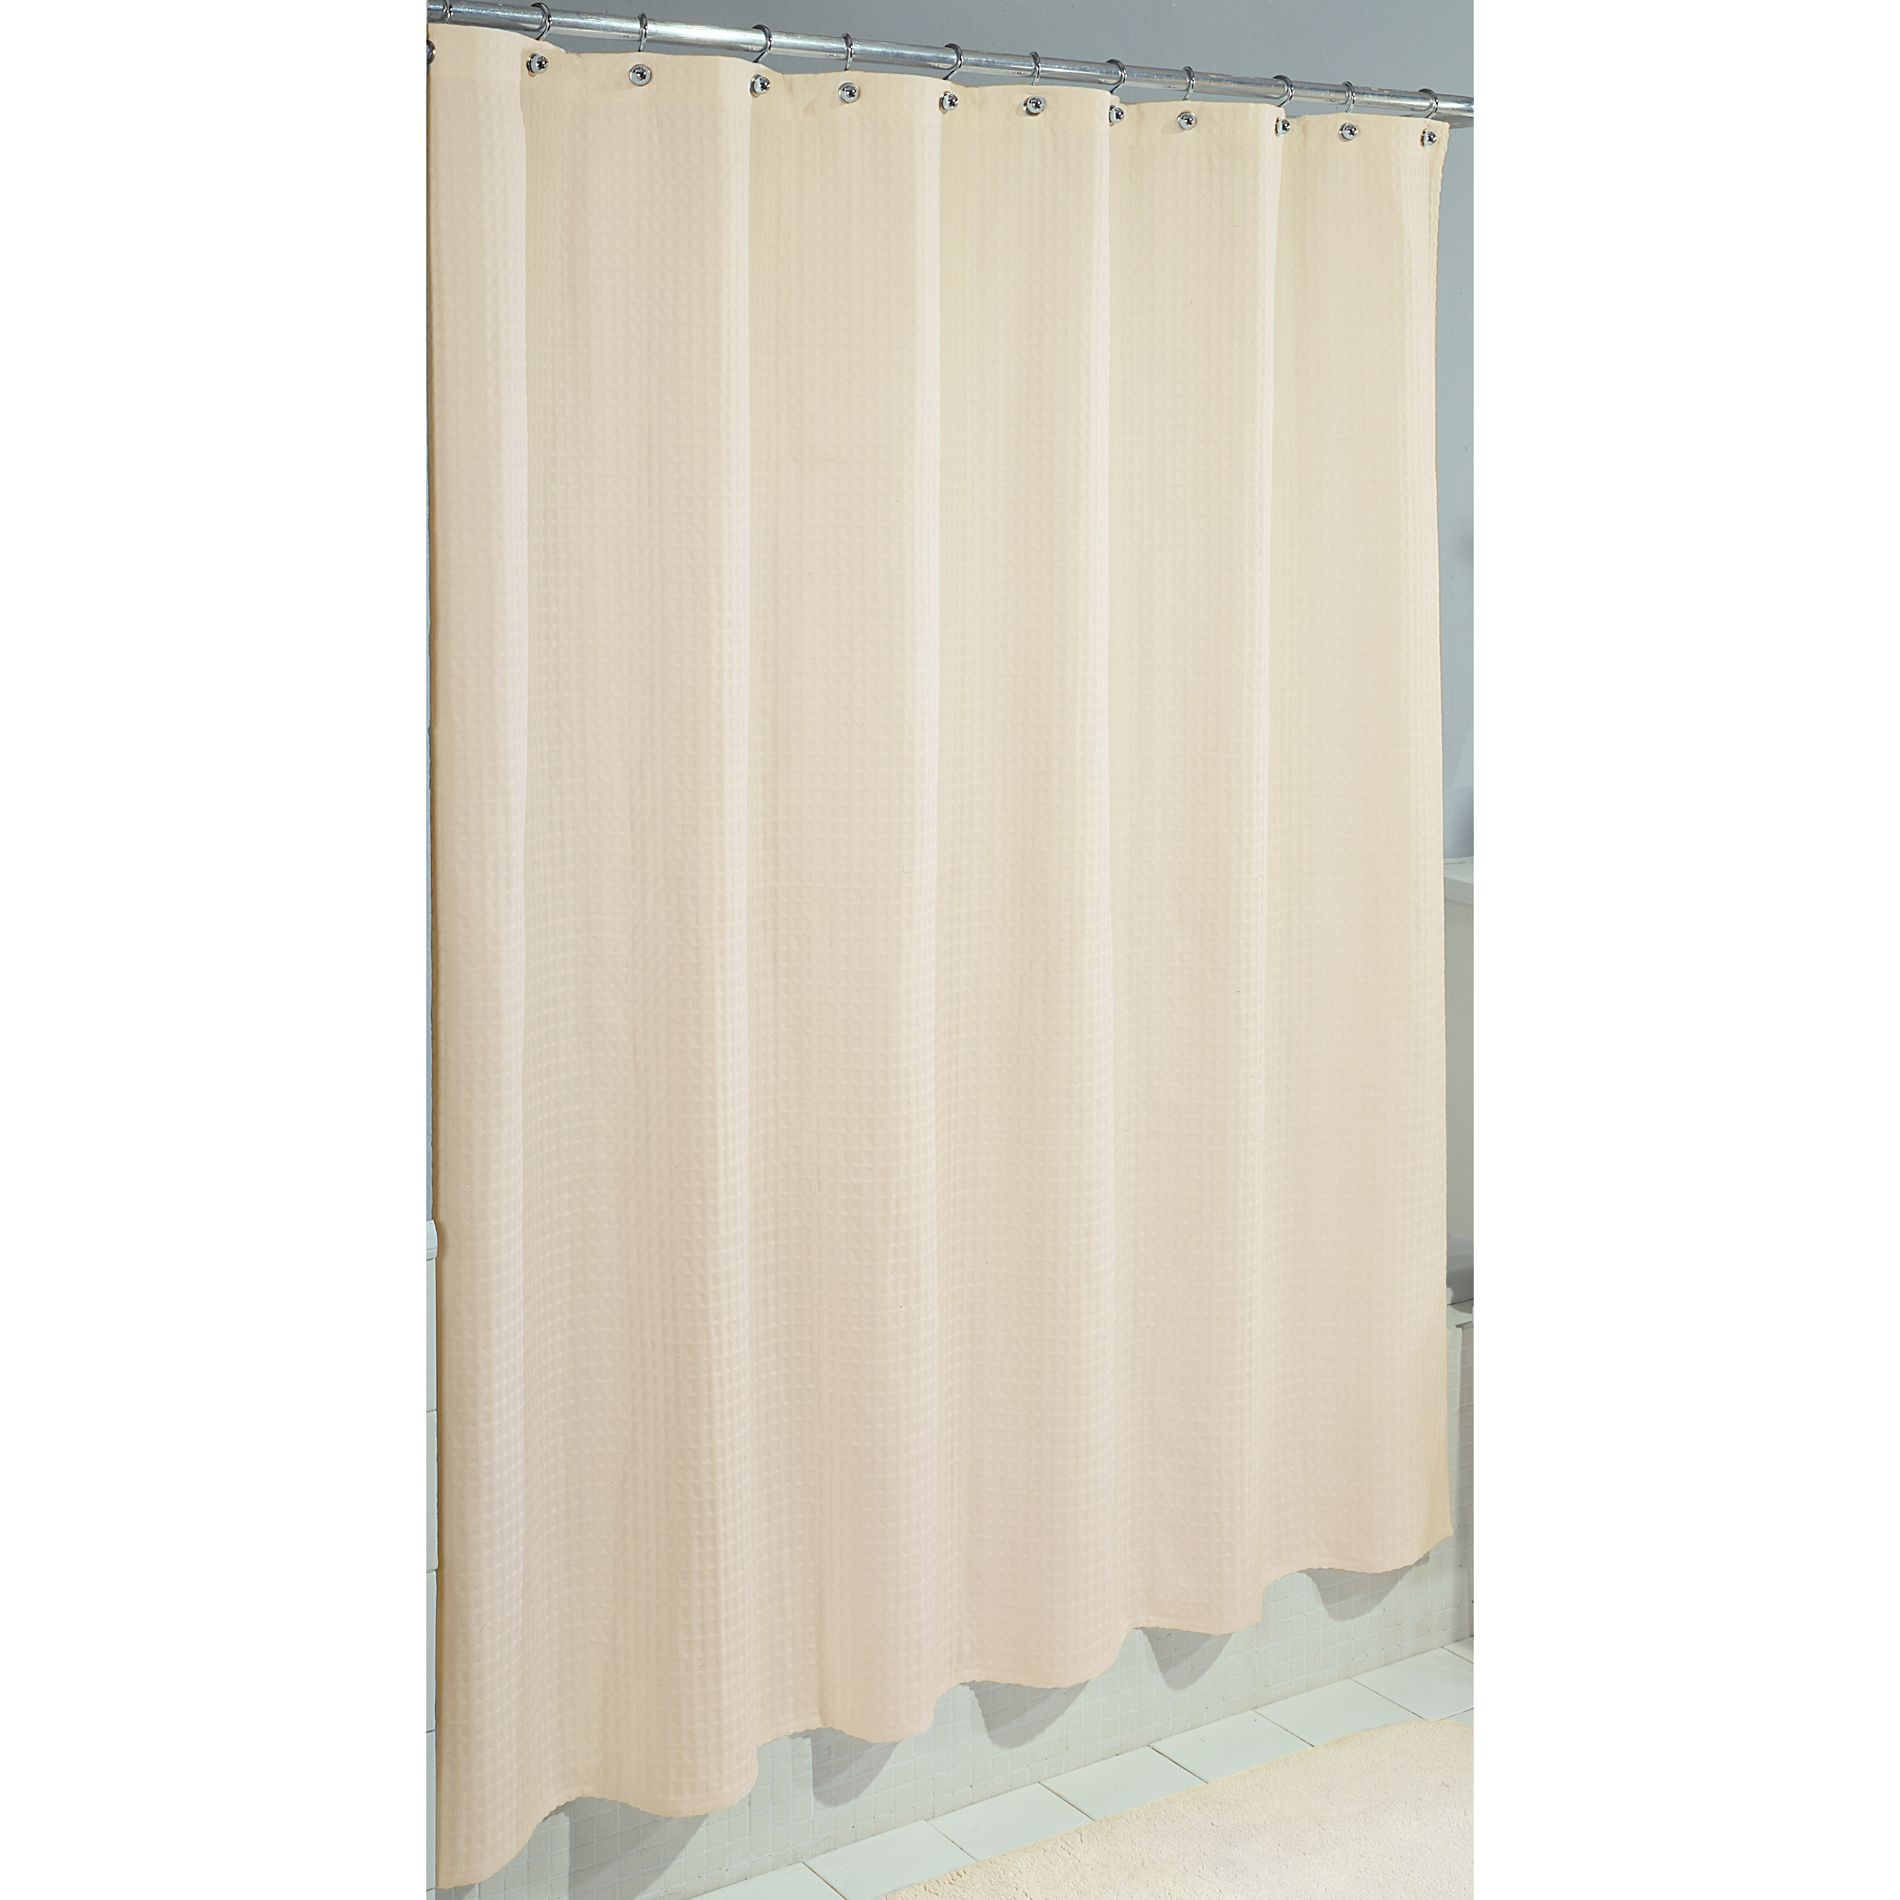 Ex-Cell Home Fashions Waffle Shower Curtain - Natural